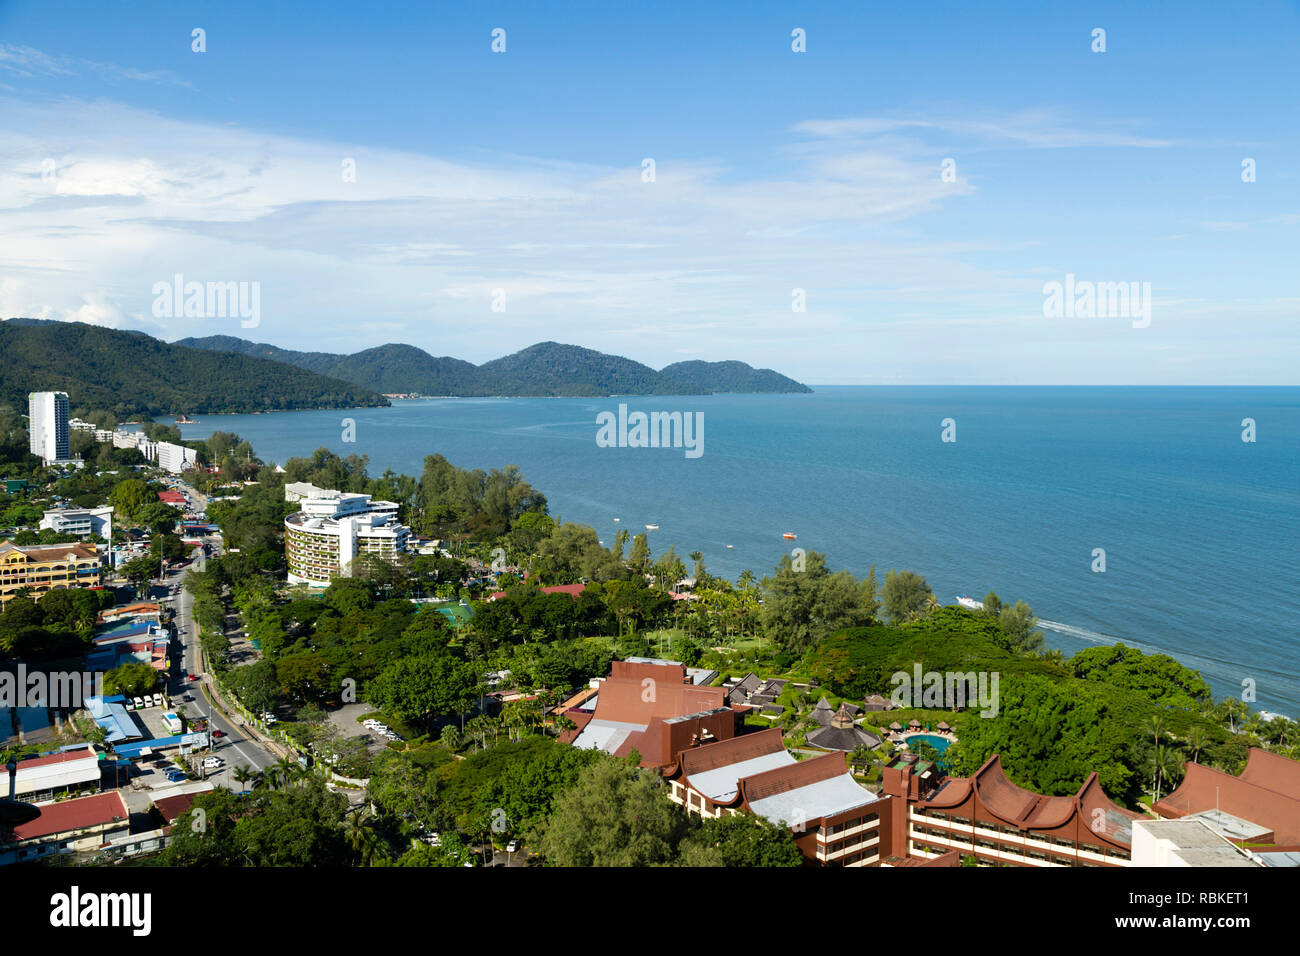 Aerial view of Batu Ferringhi Beach and Penang National Park located in the Malacca Strait on Penang Island, Malaysia. Batu Ferringhi is a popular tra Stock Photo